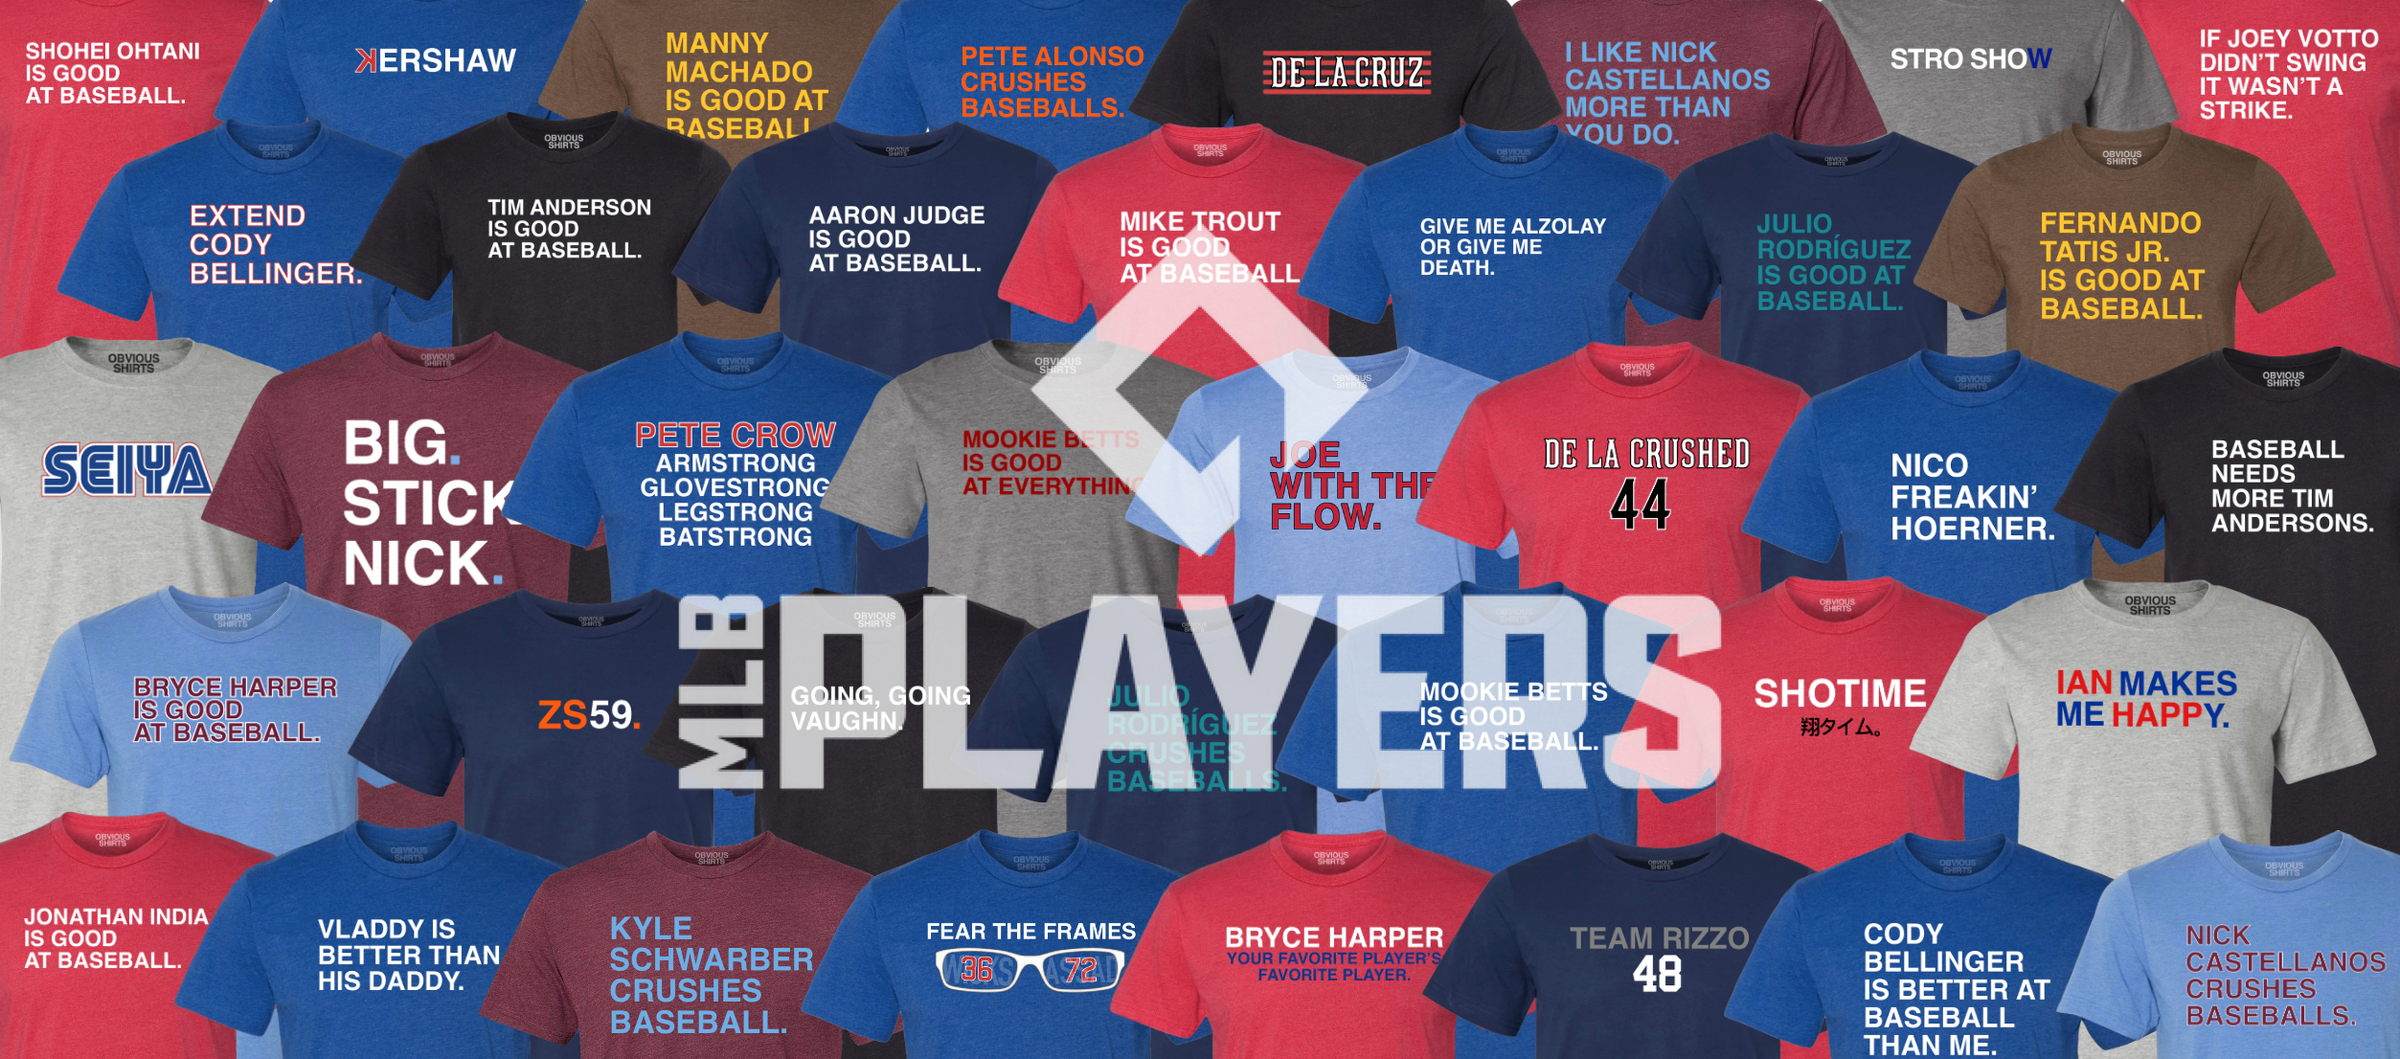 OTHER MLB PLAYERS | OBVIOUS SHIRTS.